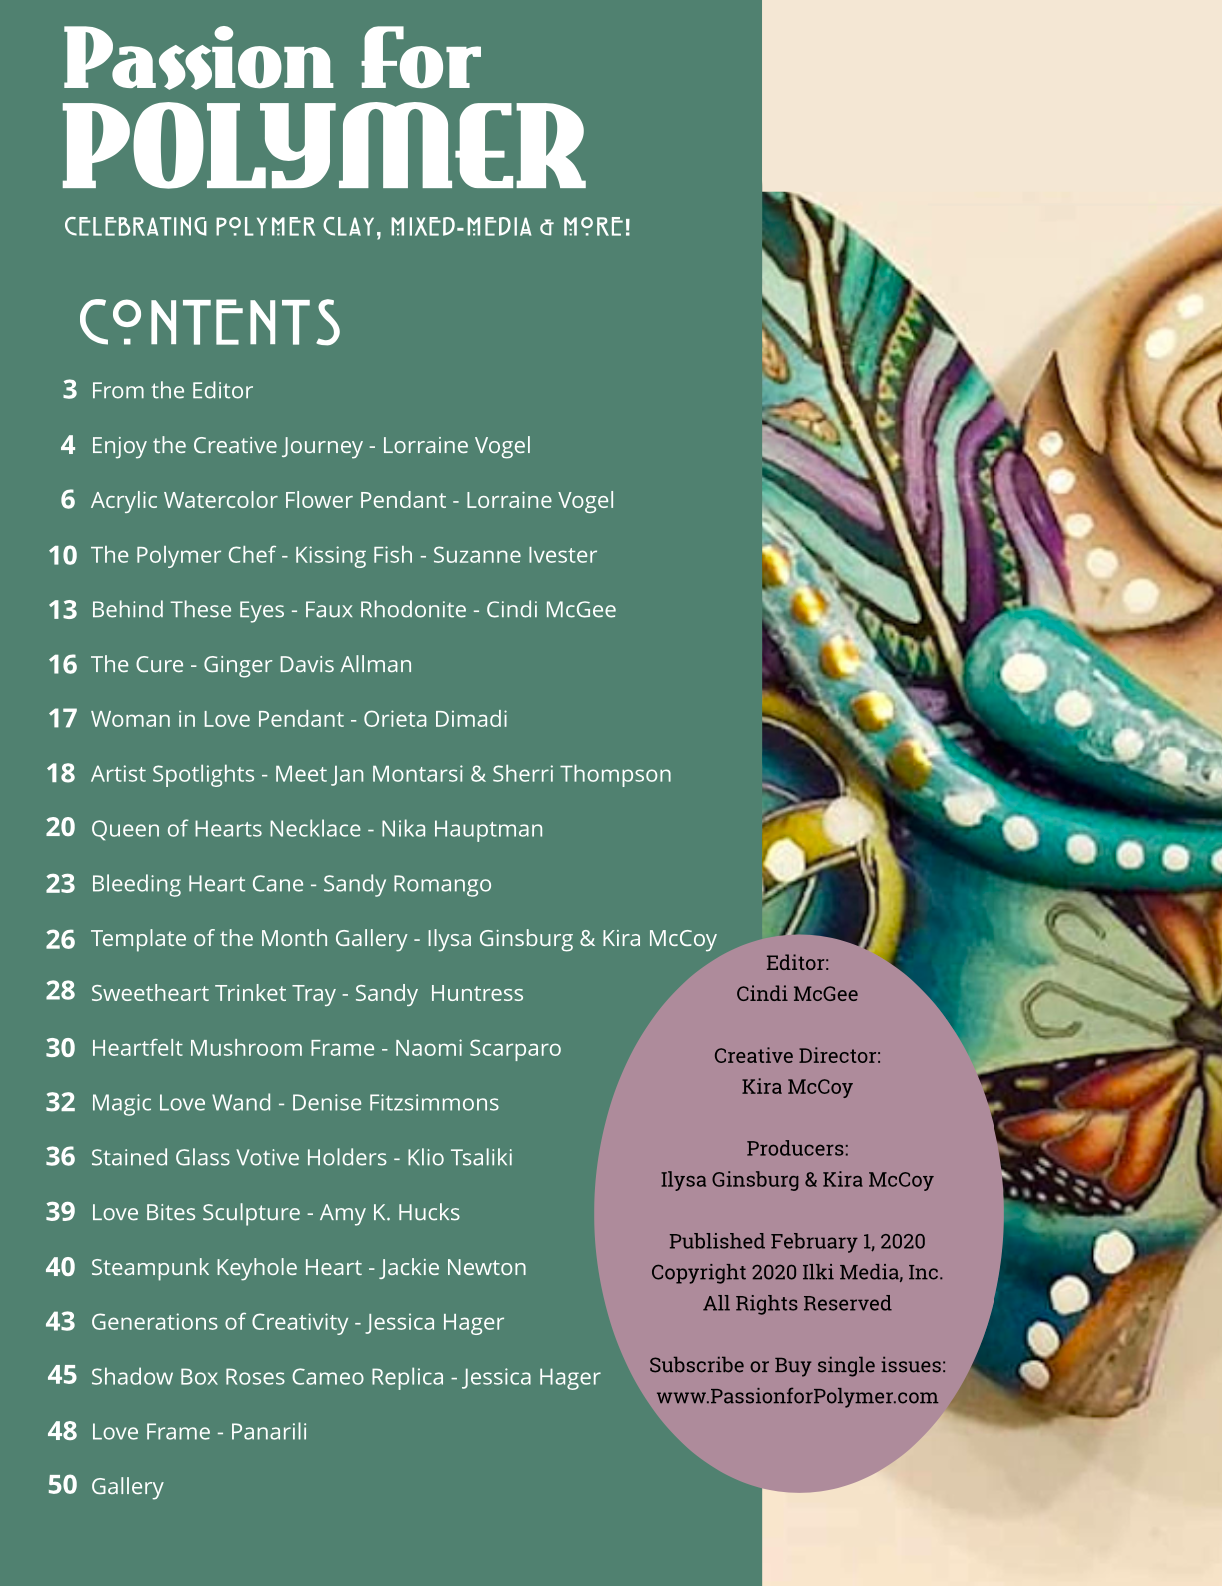 February 2020 Passion for Polymer clay magazine- DIGITAL PDF download - Polymer Clay TV tutorial and supplies